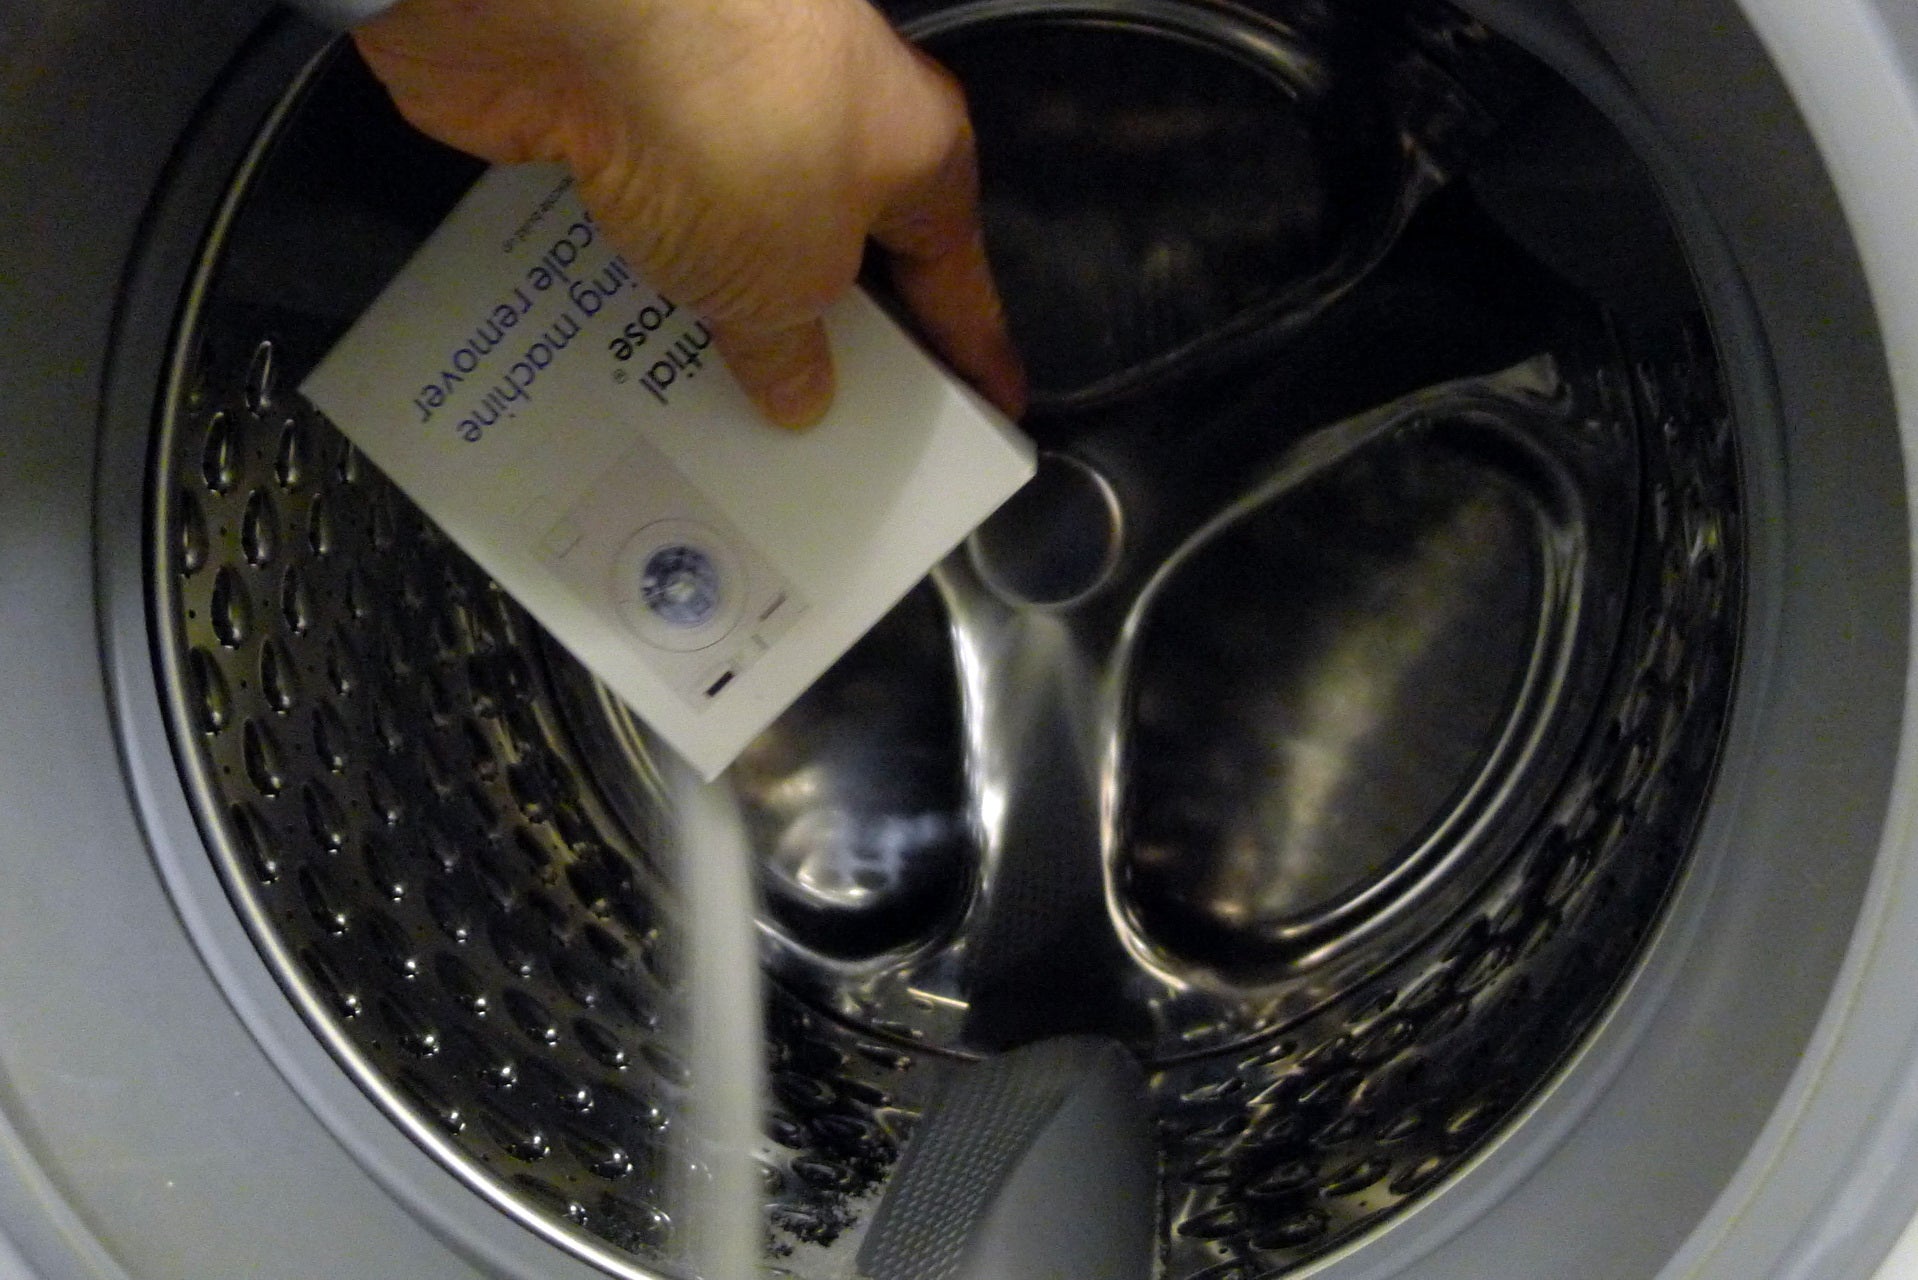 Washing machine won't drain? Here's how to unblock it | Trusted Reviews